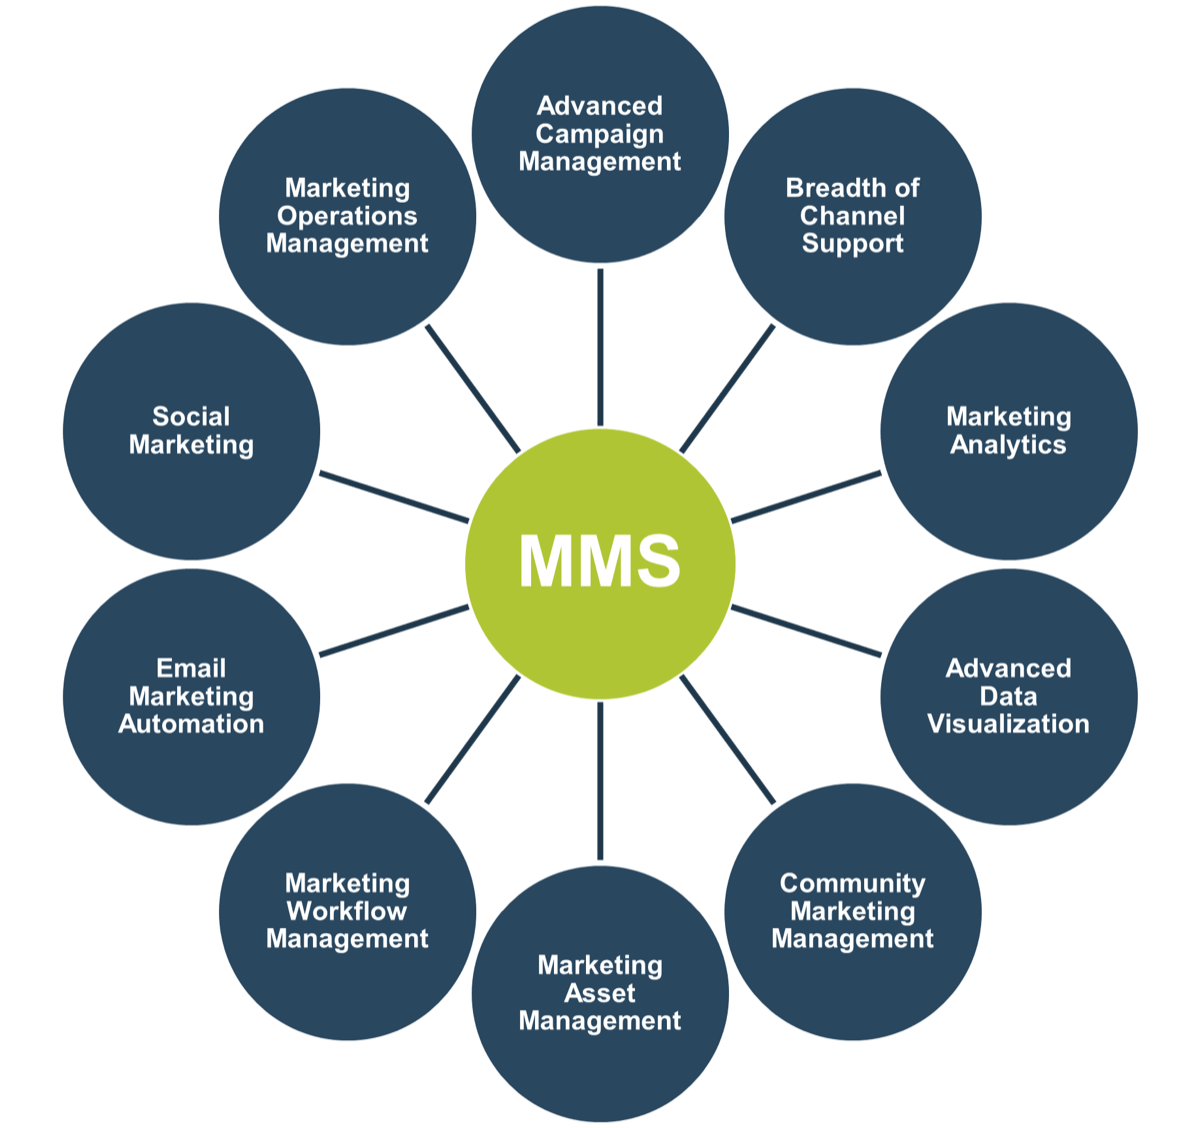 'MMS' surrounded by its integrated processes, including 'Marketing Operations Management', 'Breadth of Channel Support', 'Marketing Asset Management', etc.